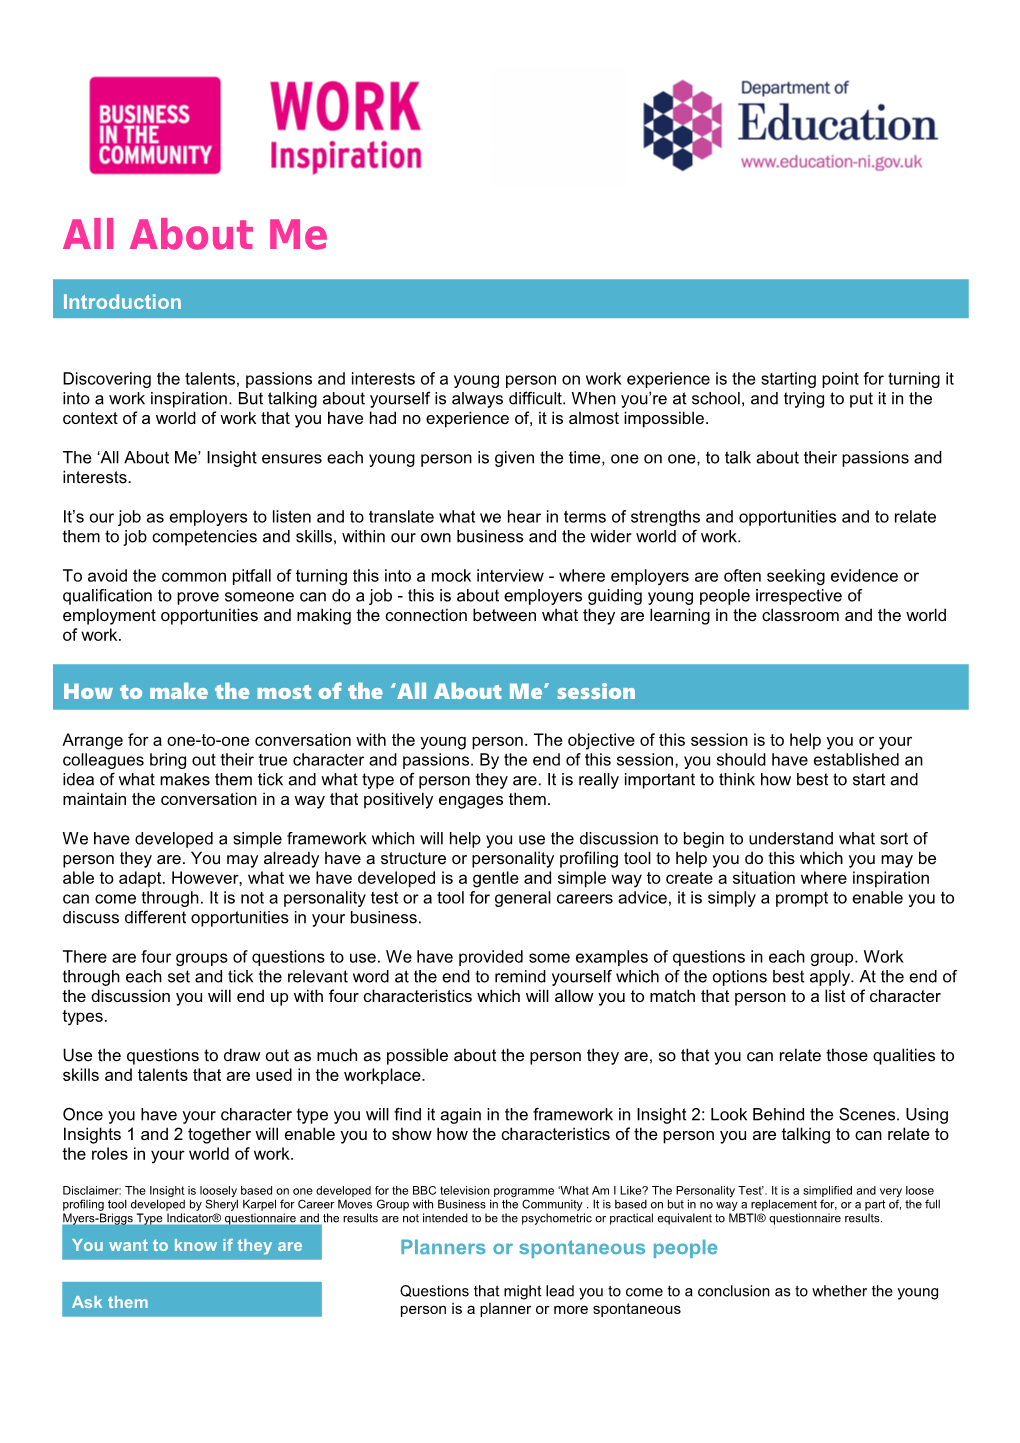 How to Make the Most of the All About Me Session